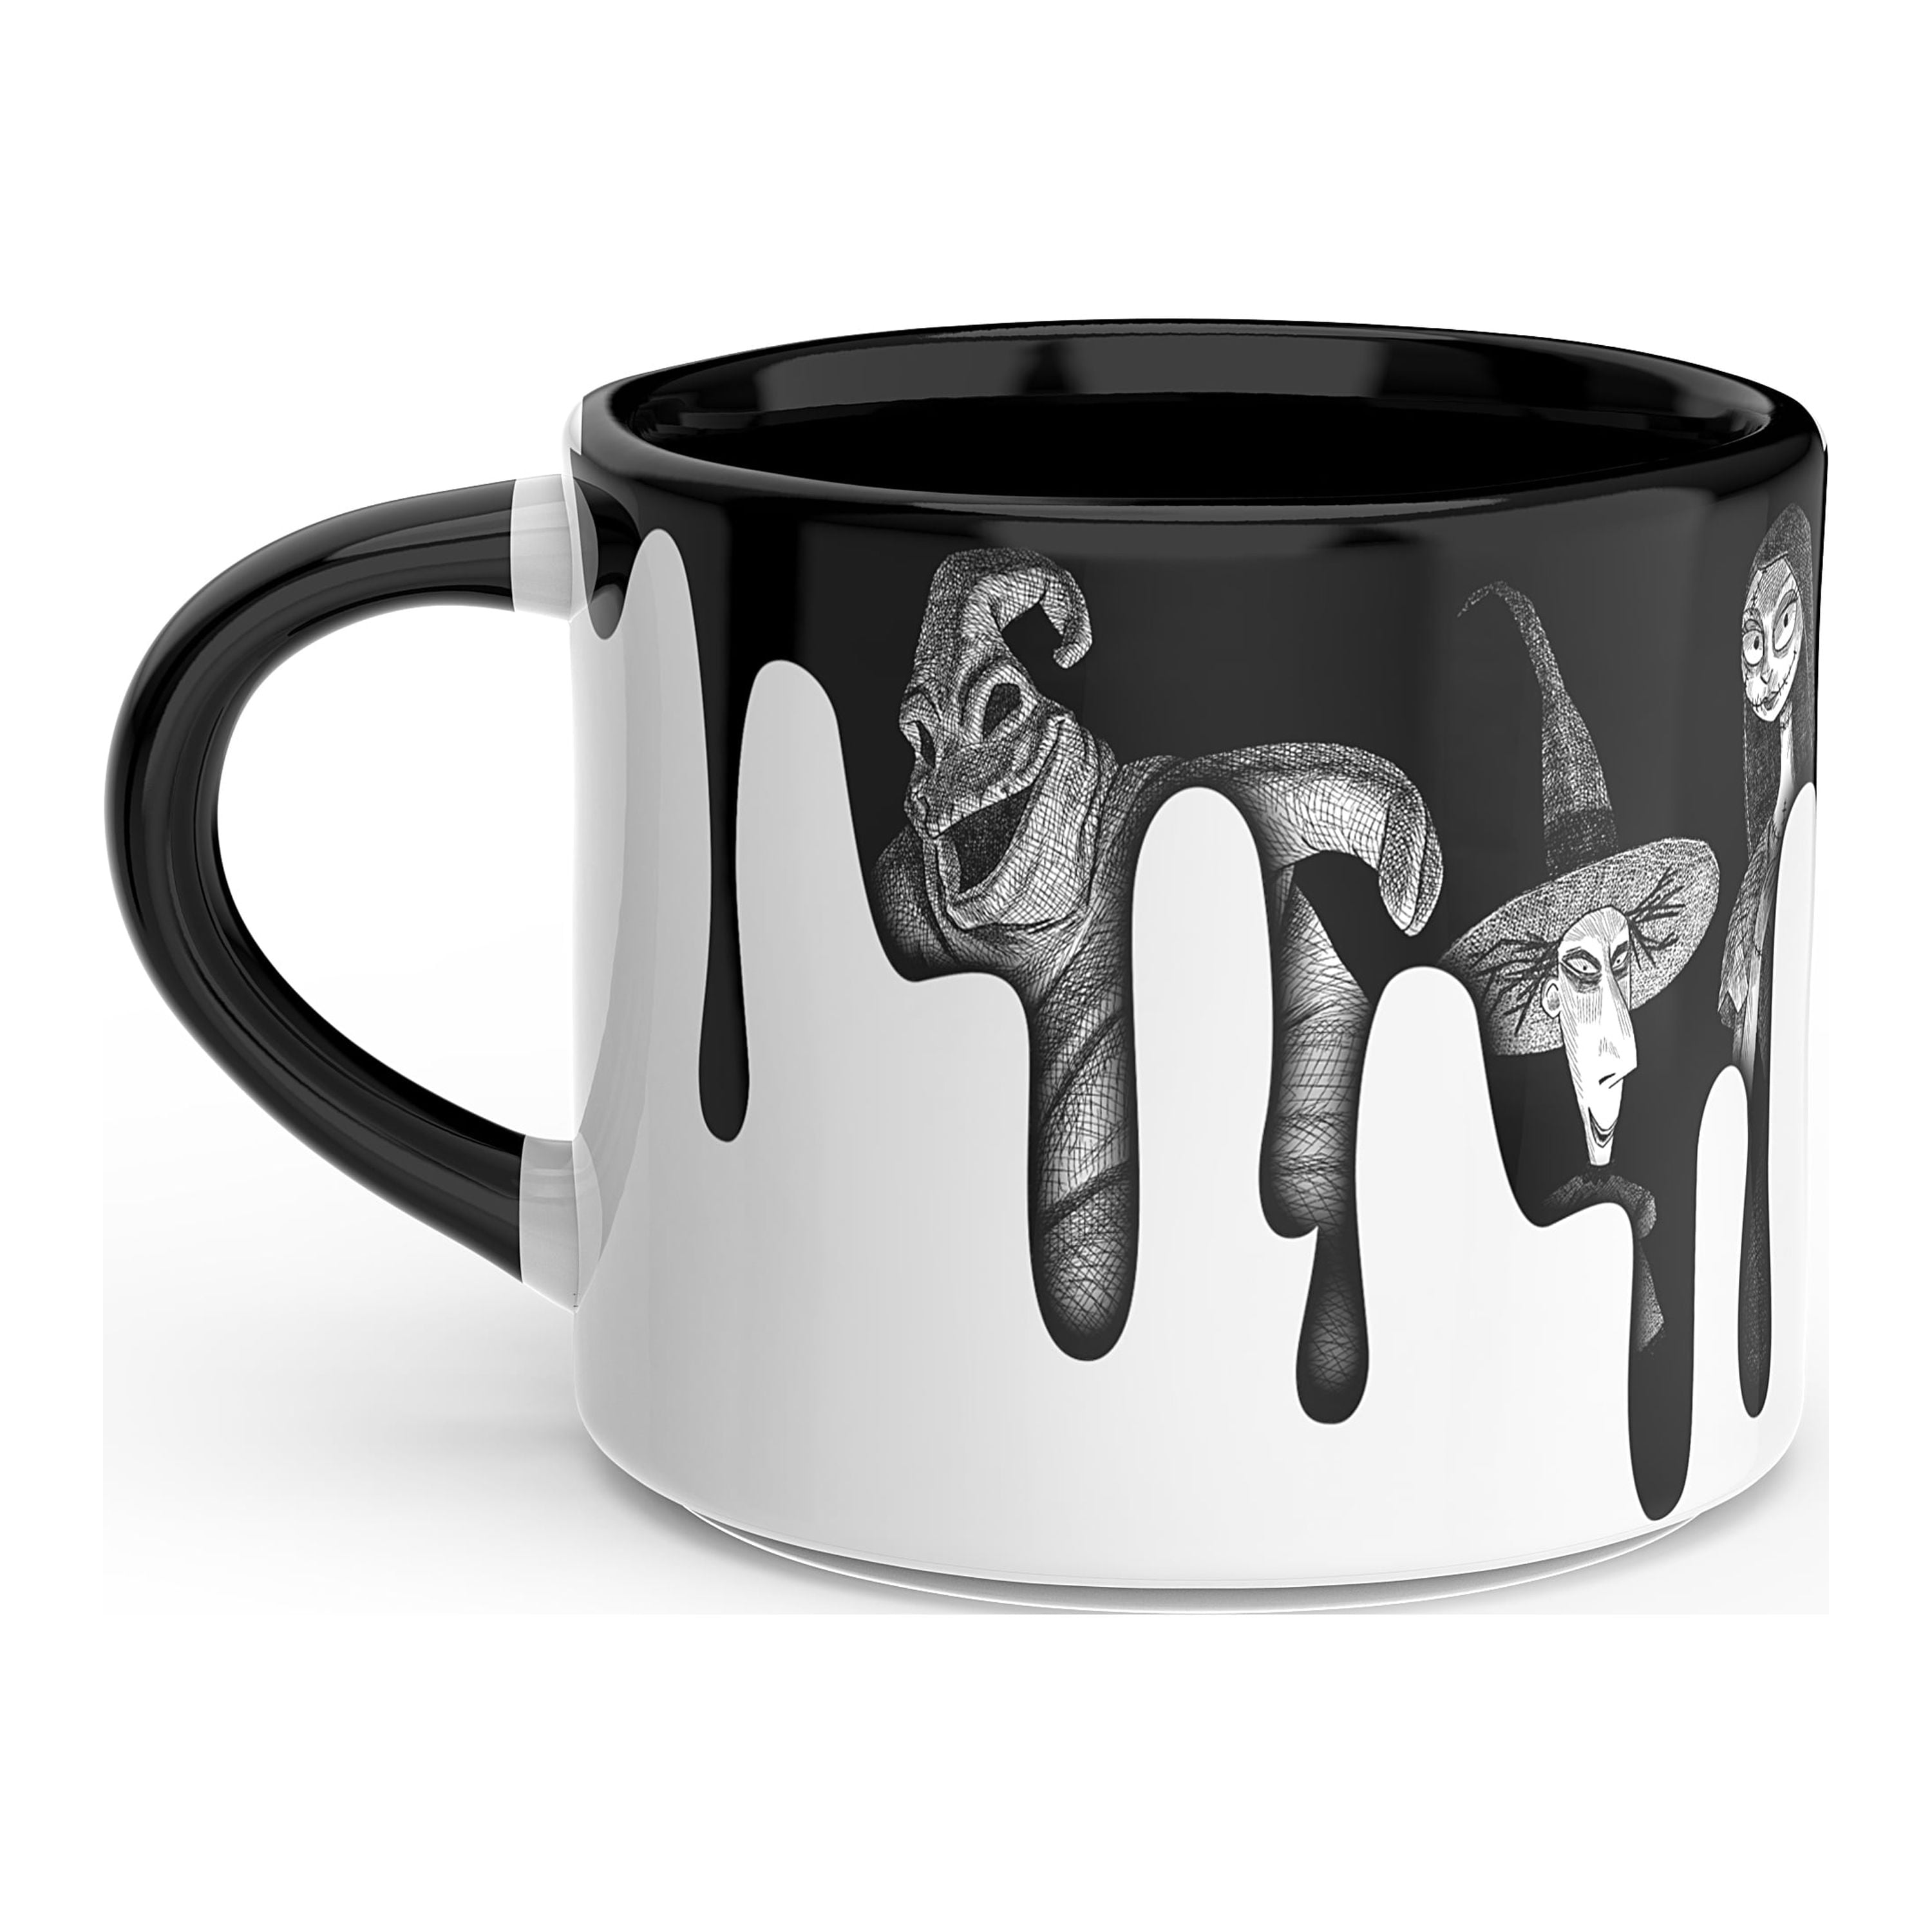 Zak Designs - A Yellowstone coffee mug makes every day feel like you're  back at the ranch. Available at Walmart.